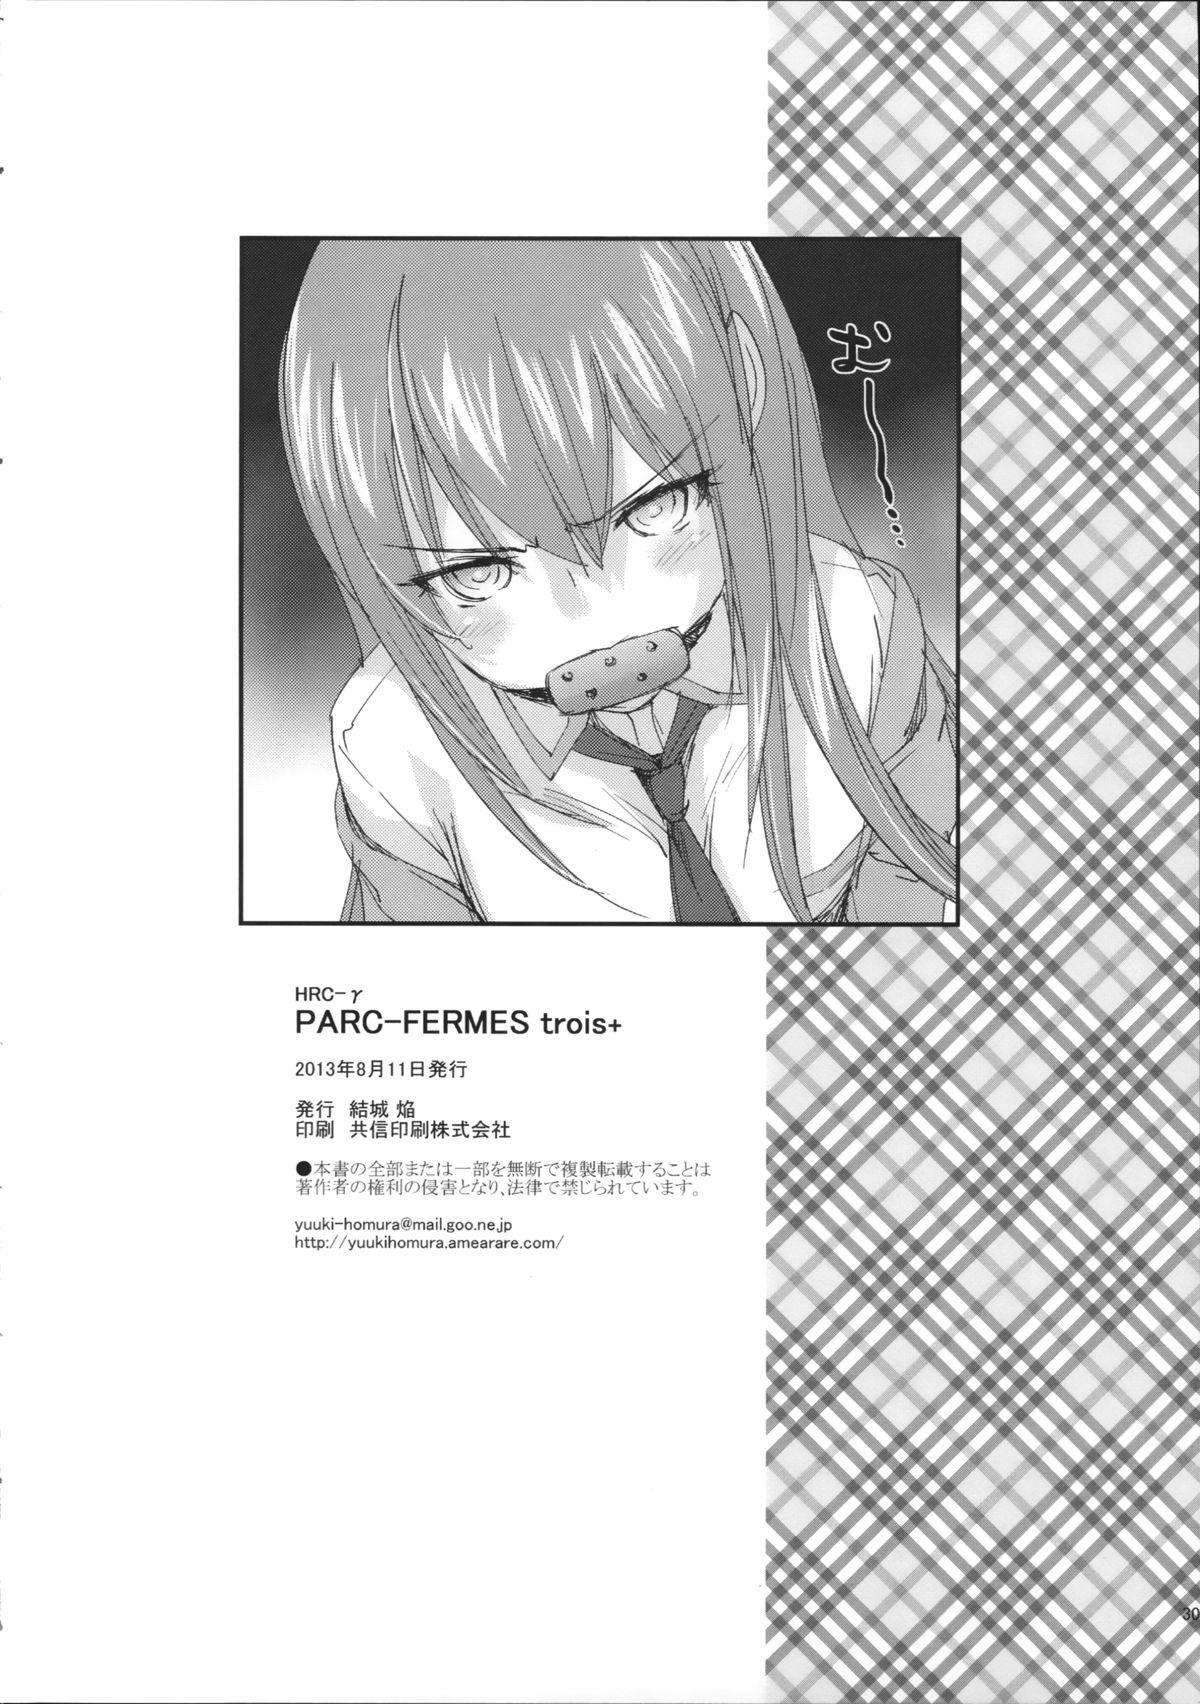 Hot Naked Girl PARC FERMES TROIS+ - Steinsgate Swing - Page 30